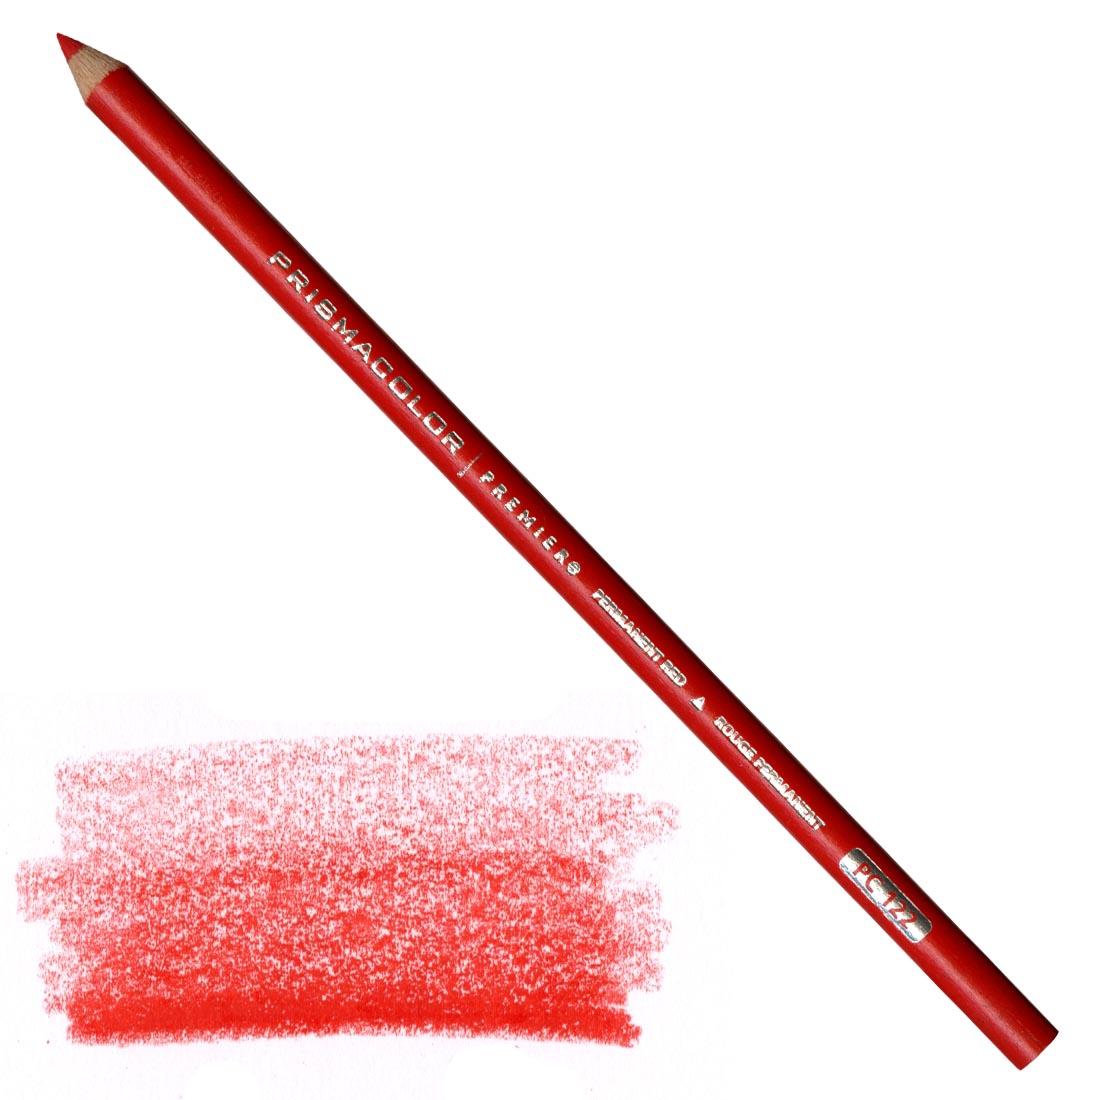 Permanent Red Prismacolor Premier Colored Pencil with a sample colored swatch